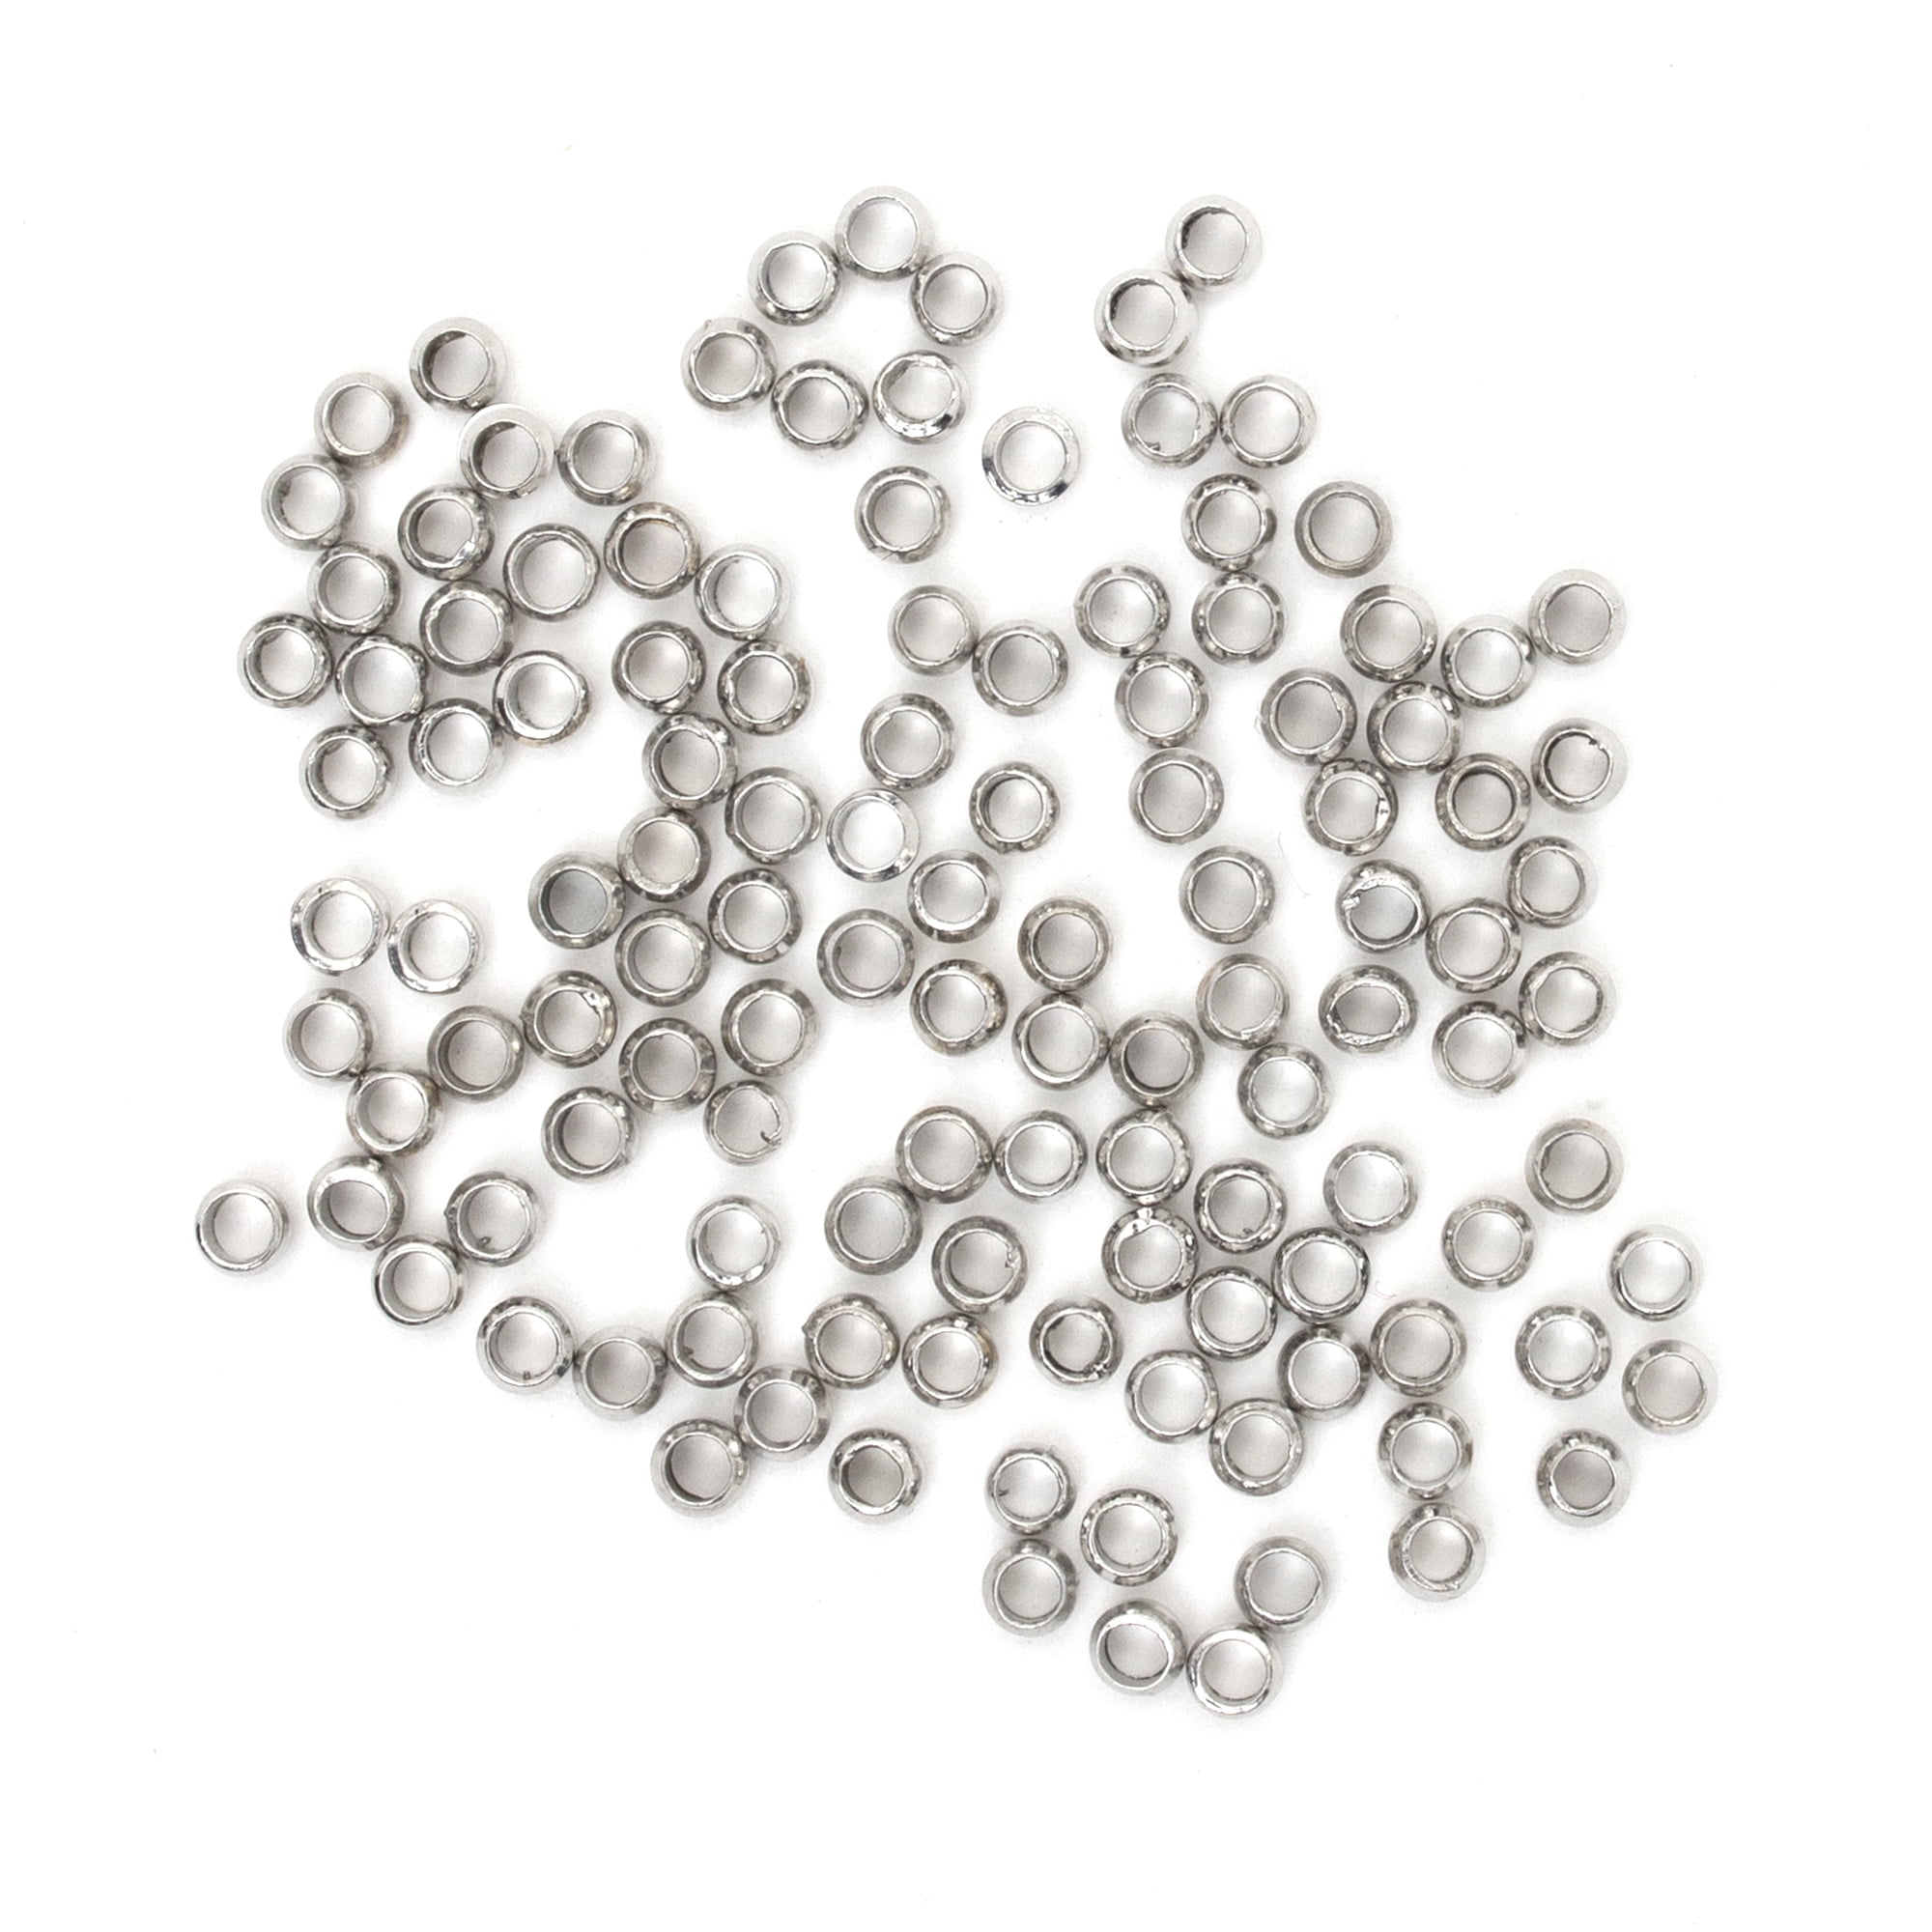 no hole Circle Shaped Acrylic Mirror silver Embellishments 2mm thick 10 x 1cm 